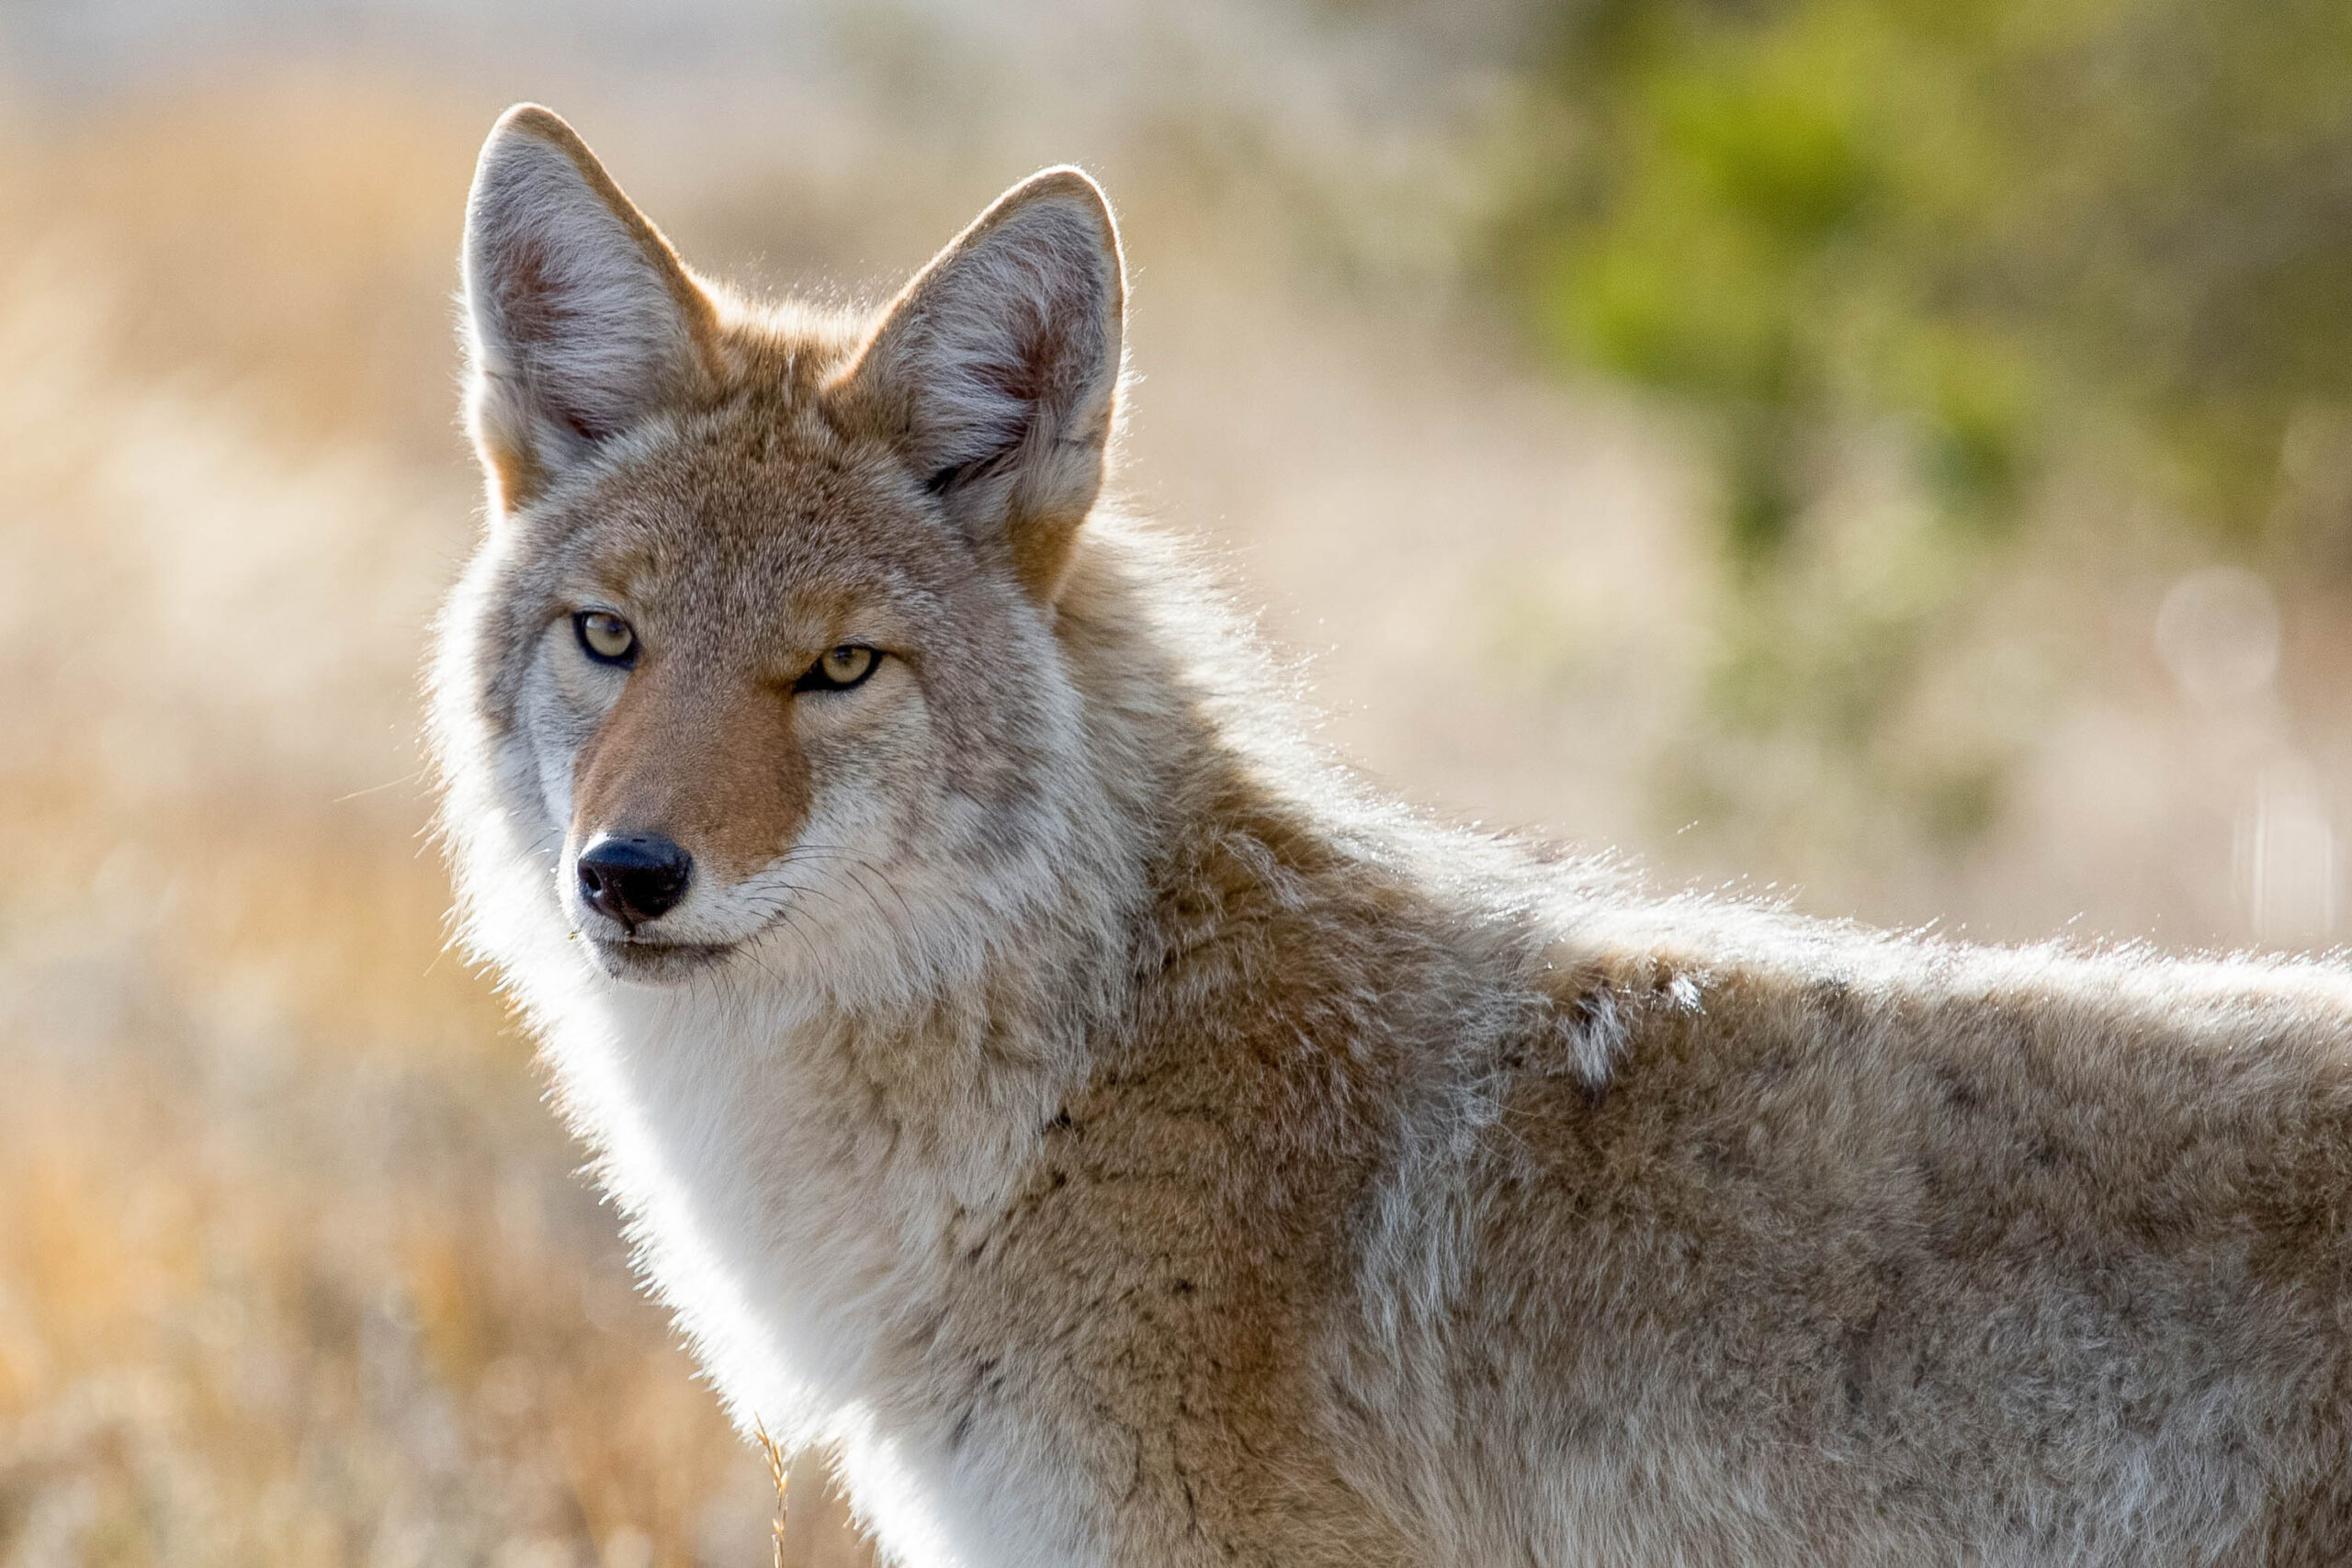 How Coyotes Are Winning The War We’ve Waged On Them